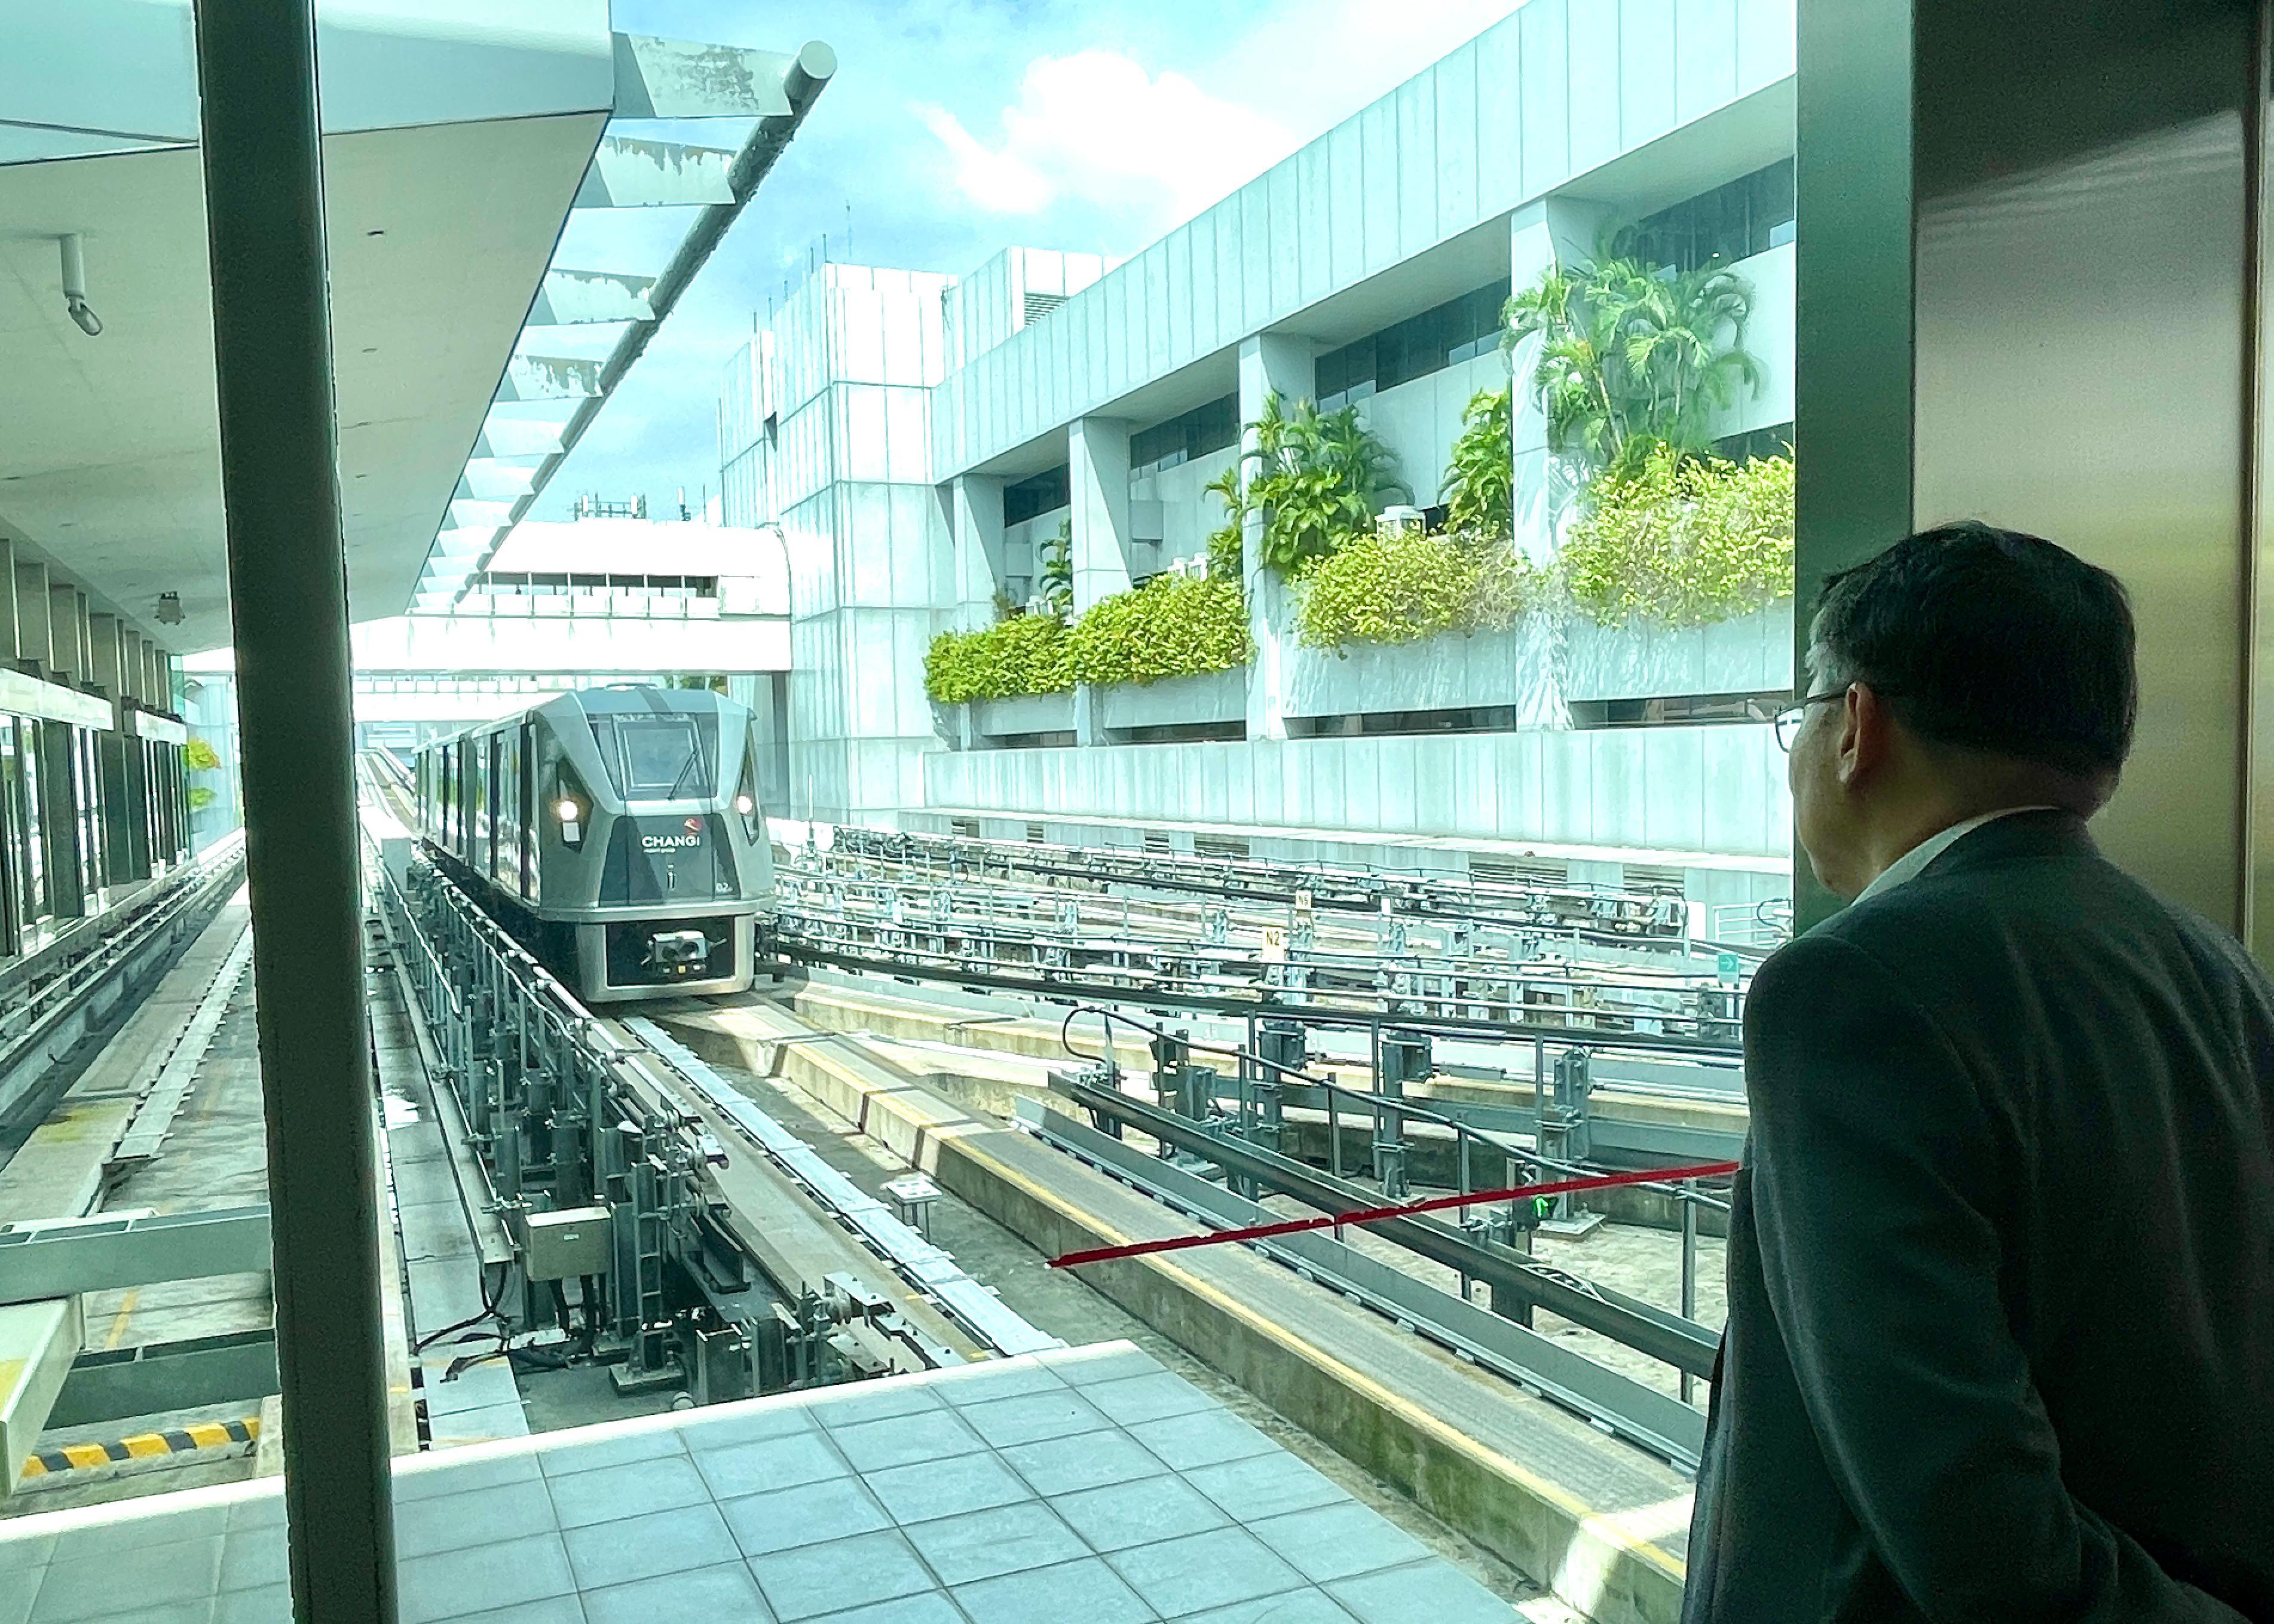 The Secretary for Transport and Logistics, Mr Lam Sai-hung, continued his visit to Singapore today (January 31). Photo shows Mr Lam inspecting the Skytrain at Changi Airport.